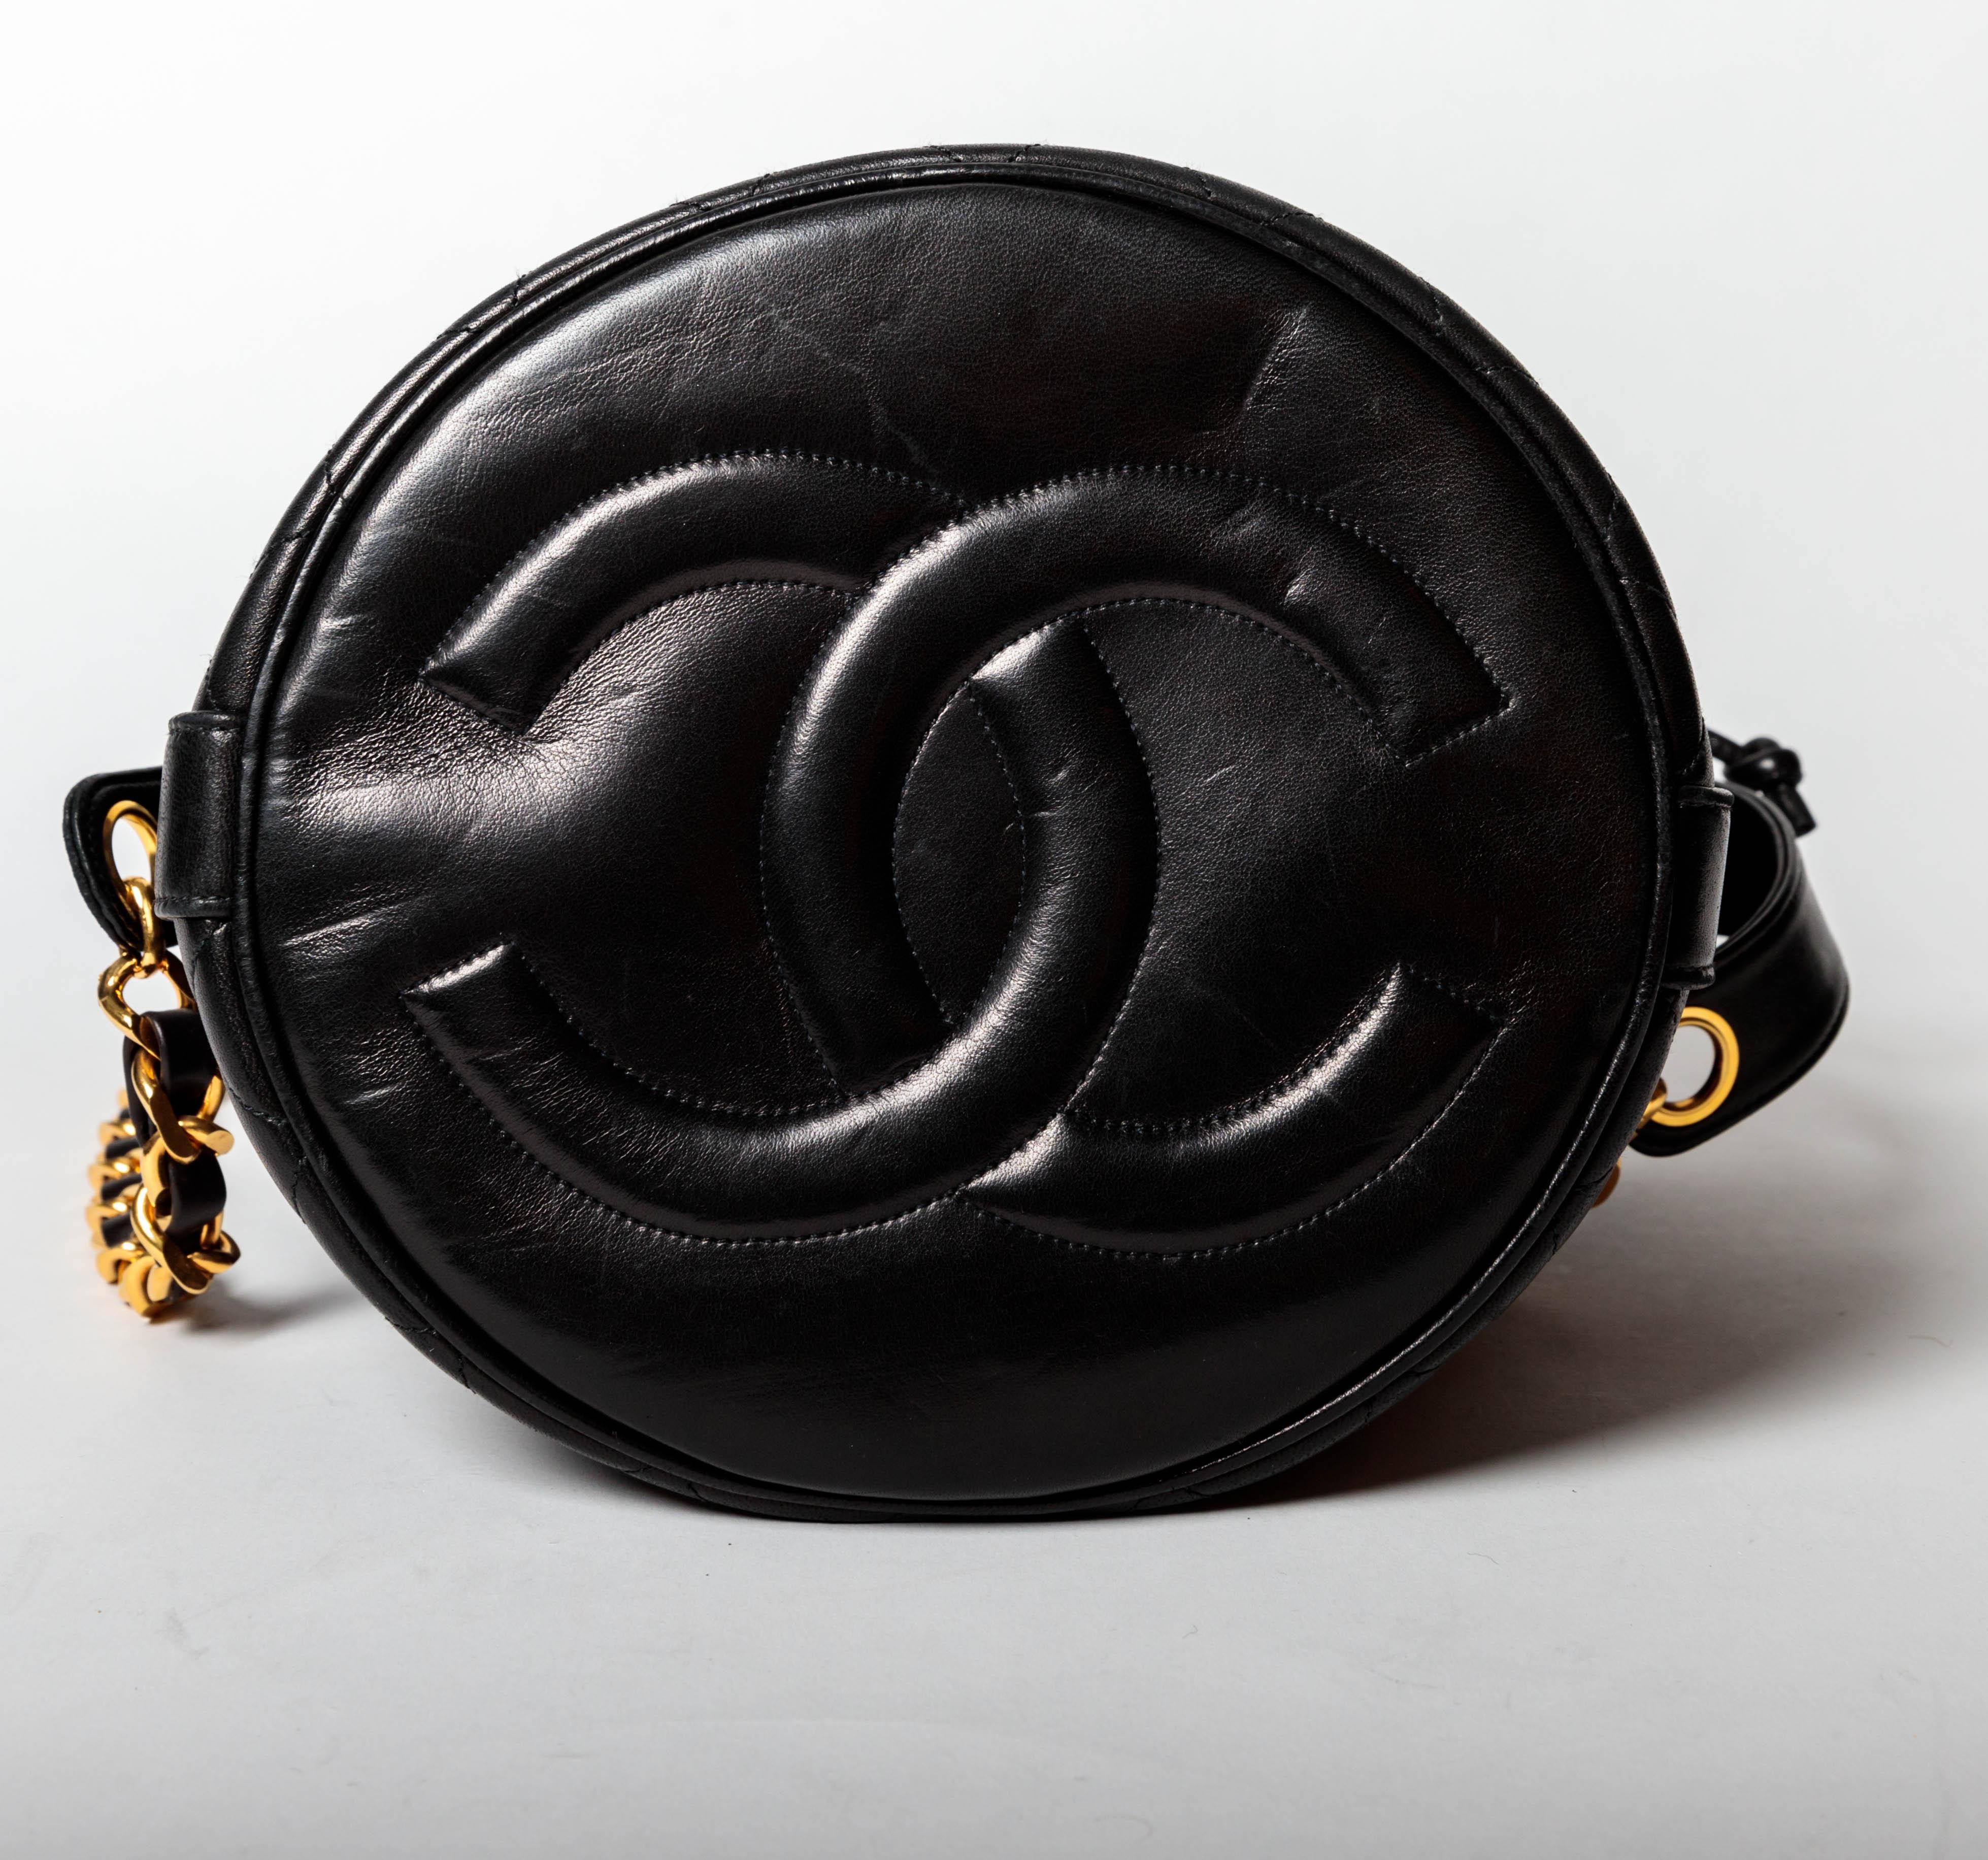 Chanel Black Lambskin Bucket Bag with Gold Hardware  For Sale 1